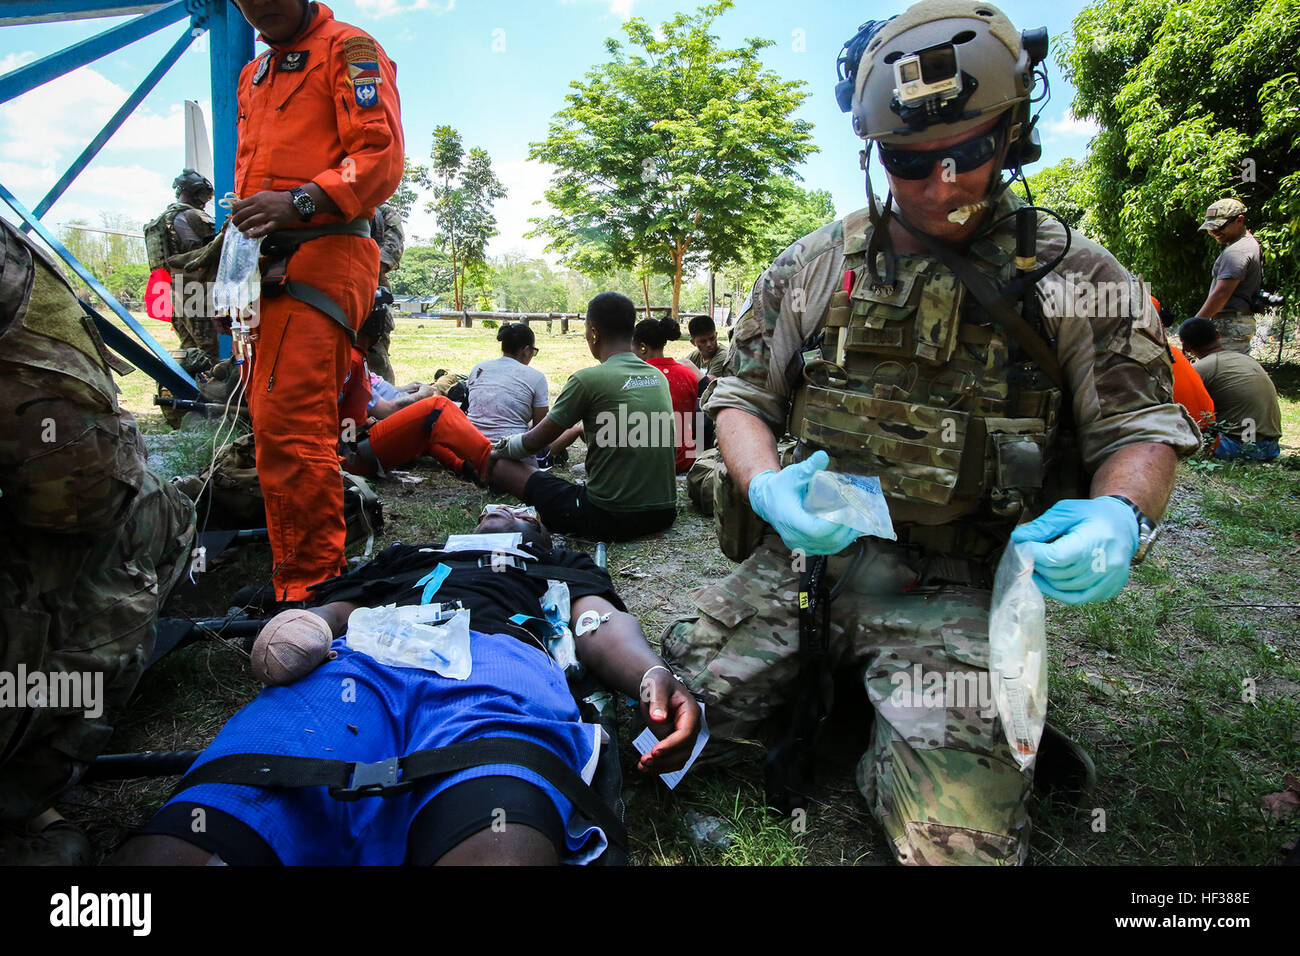 U.S. Air Force Staff Sgt. Jason Fischman, a pararescueman with 31st Rescue Squadron, assists victims of a plane crash as part of a notional mass casualty incident during Exercise Balikatan 2015, in Clark Air Base, Philippines, April 24. The drill was conducted alongside rescuemen from the 505th Rescue and Search Group of the Philippine Air Force. The bilateral training event provided both rescue teams with a better understanding of how each other operates and ensures mission accomplishment should they work side-by-side in the future. Balikatan is an annual Philippines-U.S. military training ex Stock Photo